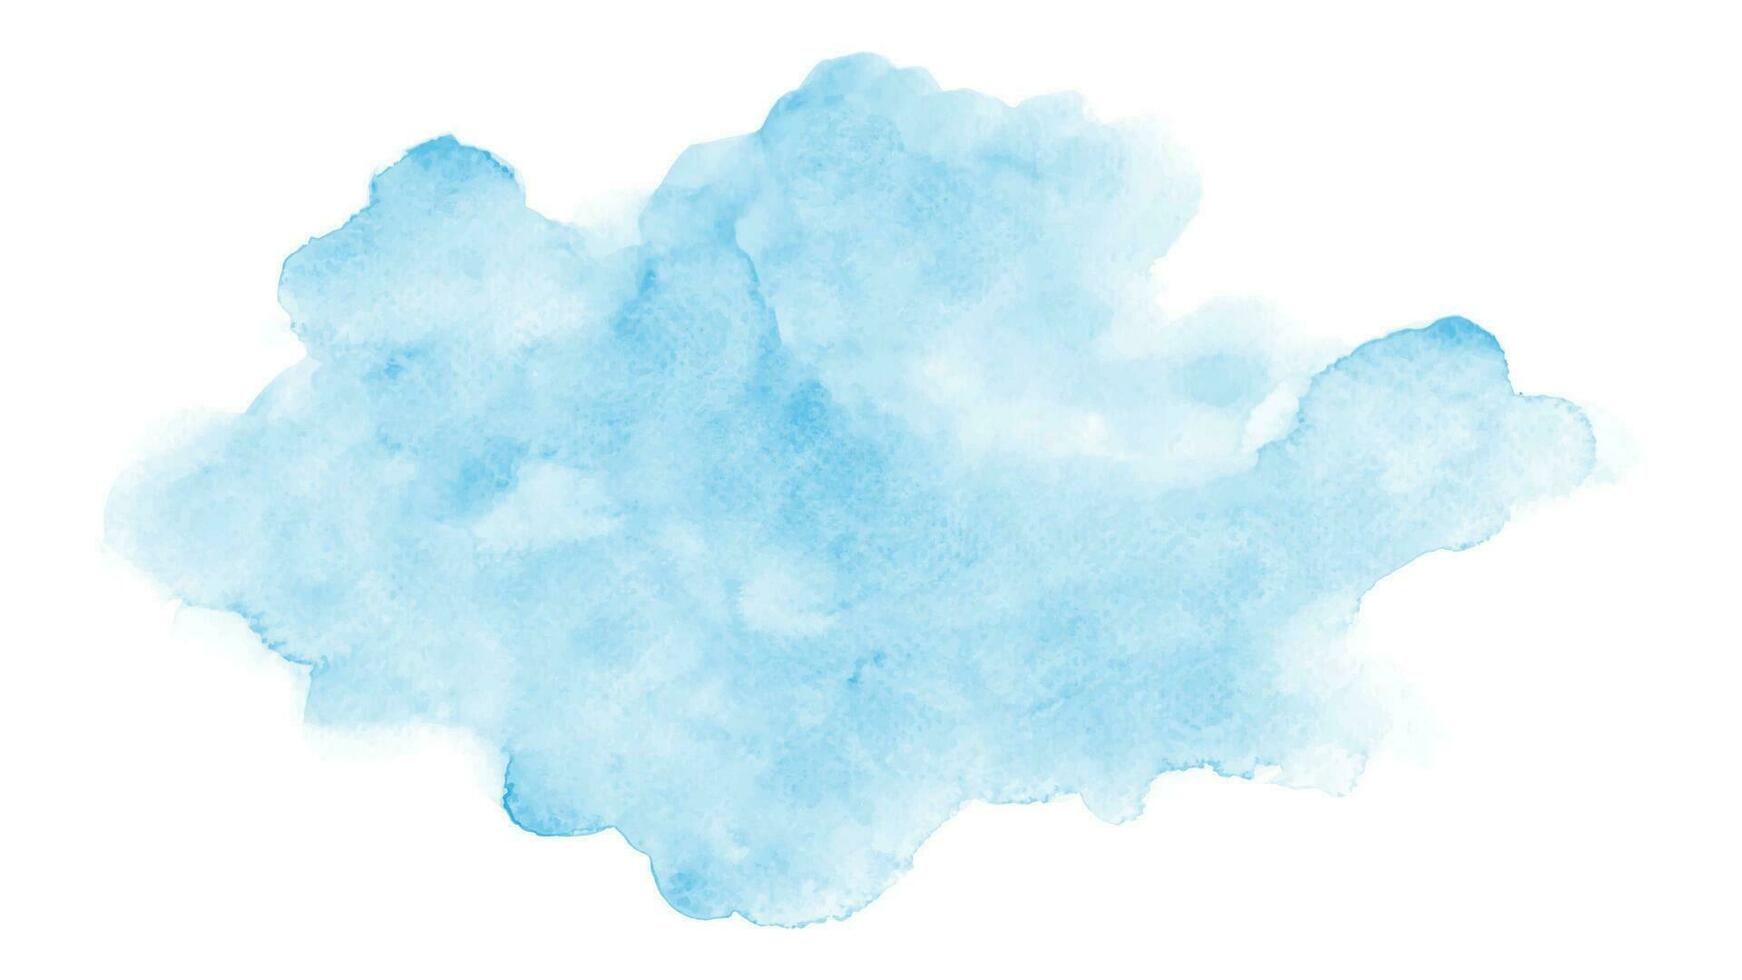 Abstract light blue clouds watercolor stain on white background vector